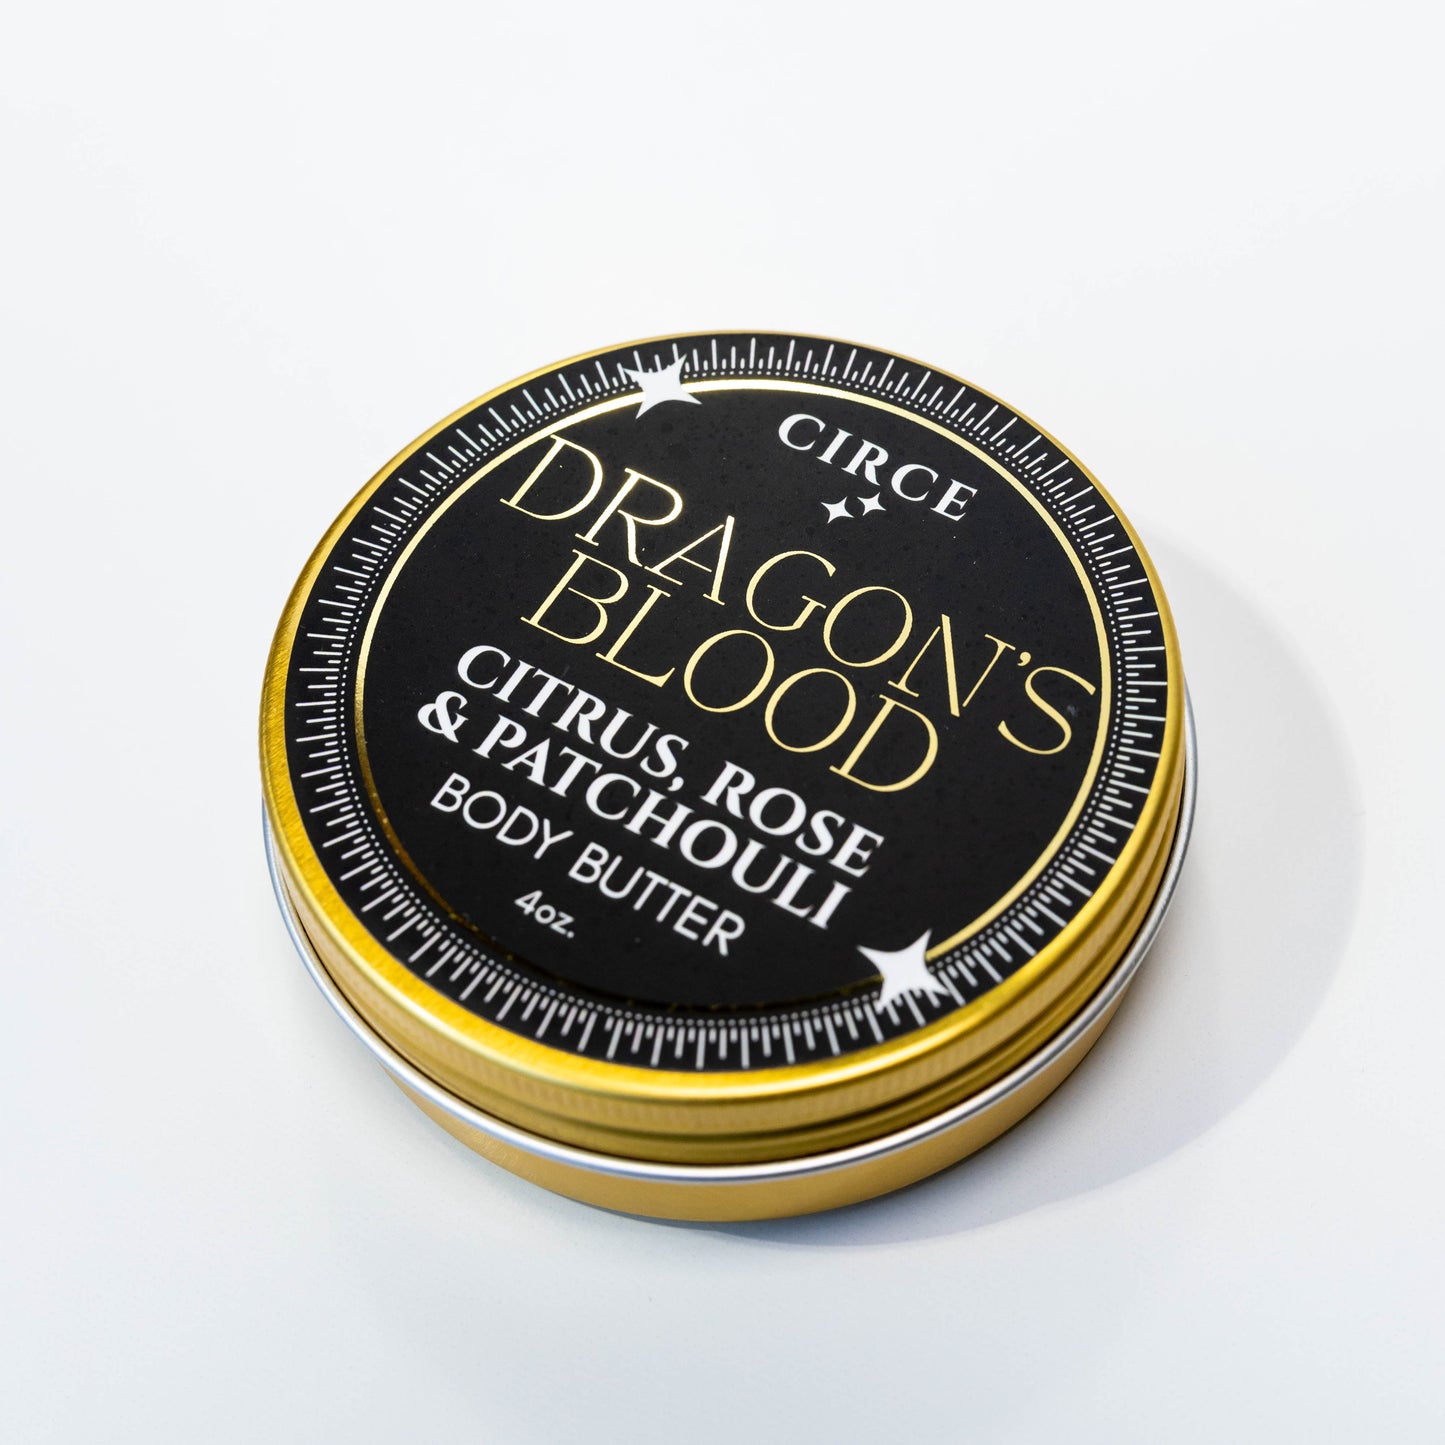 Dragon's Blood Body Butter  from Circe Boutique